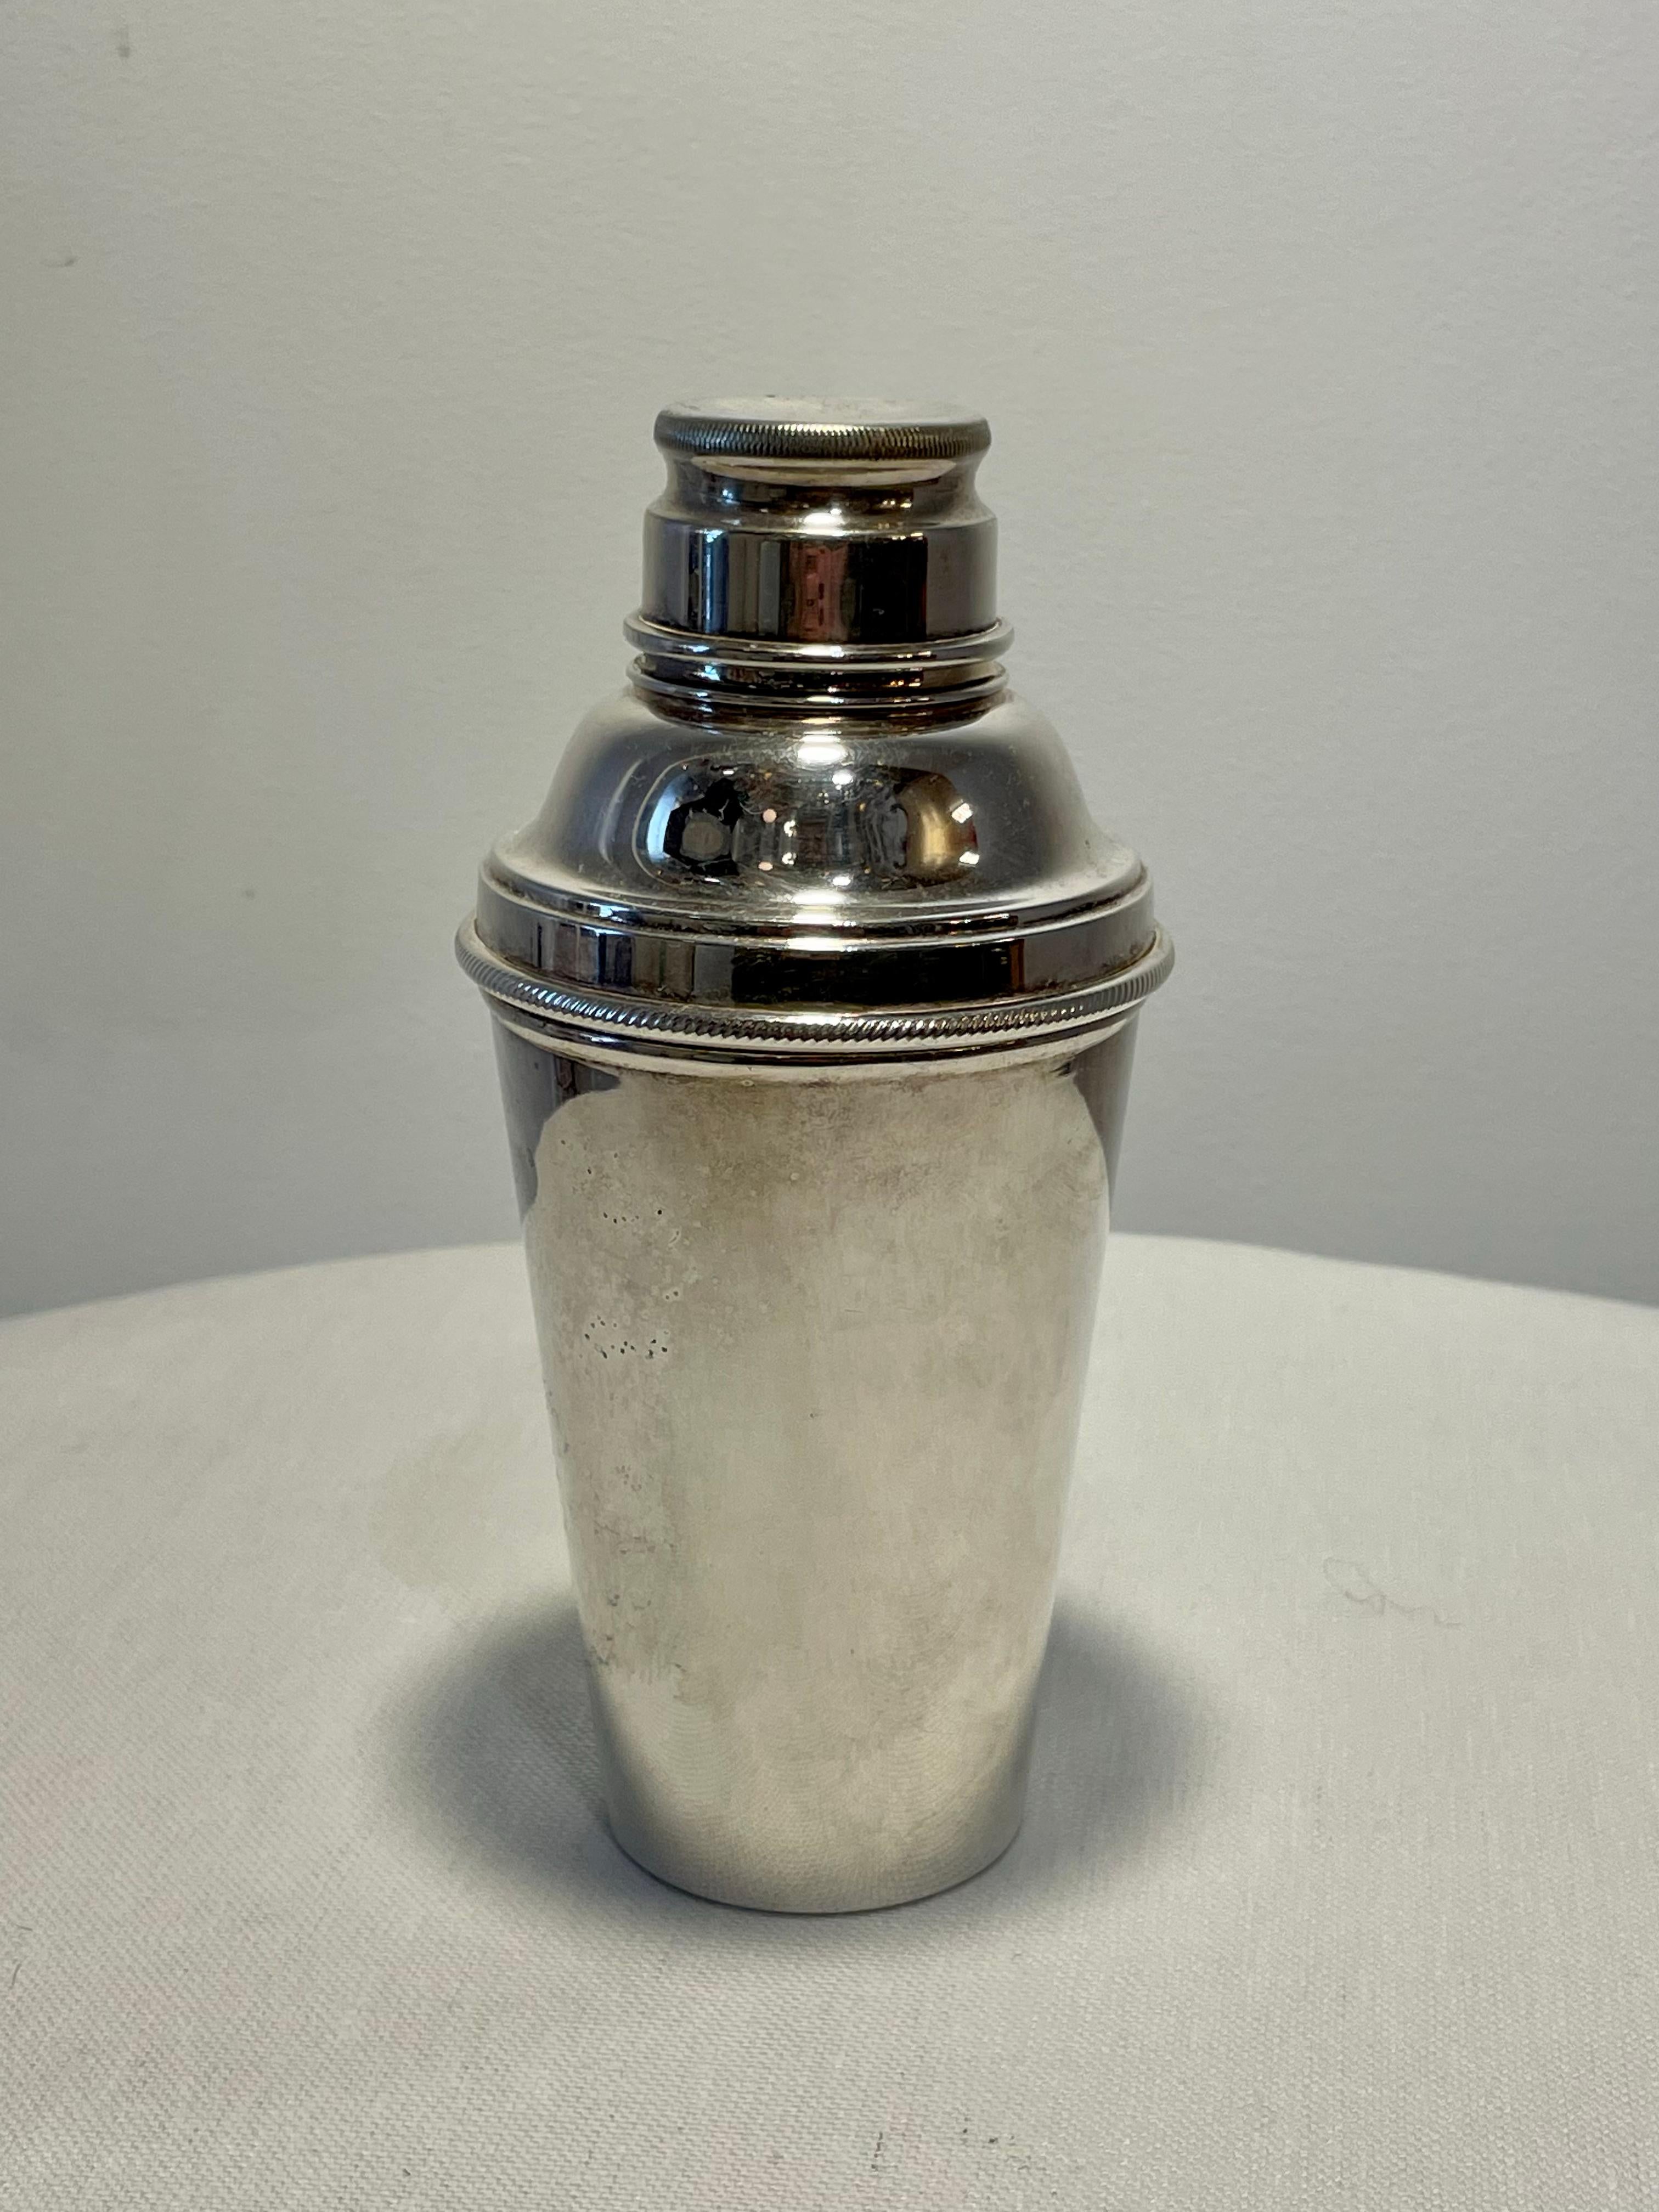 Sterling-silver plated martini shaker, small.
Sterling silver hallmarked
Silver tray and large shaker (pictured) sold separately.

